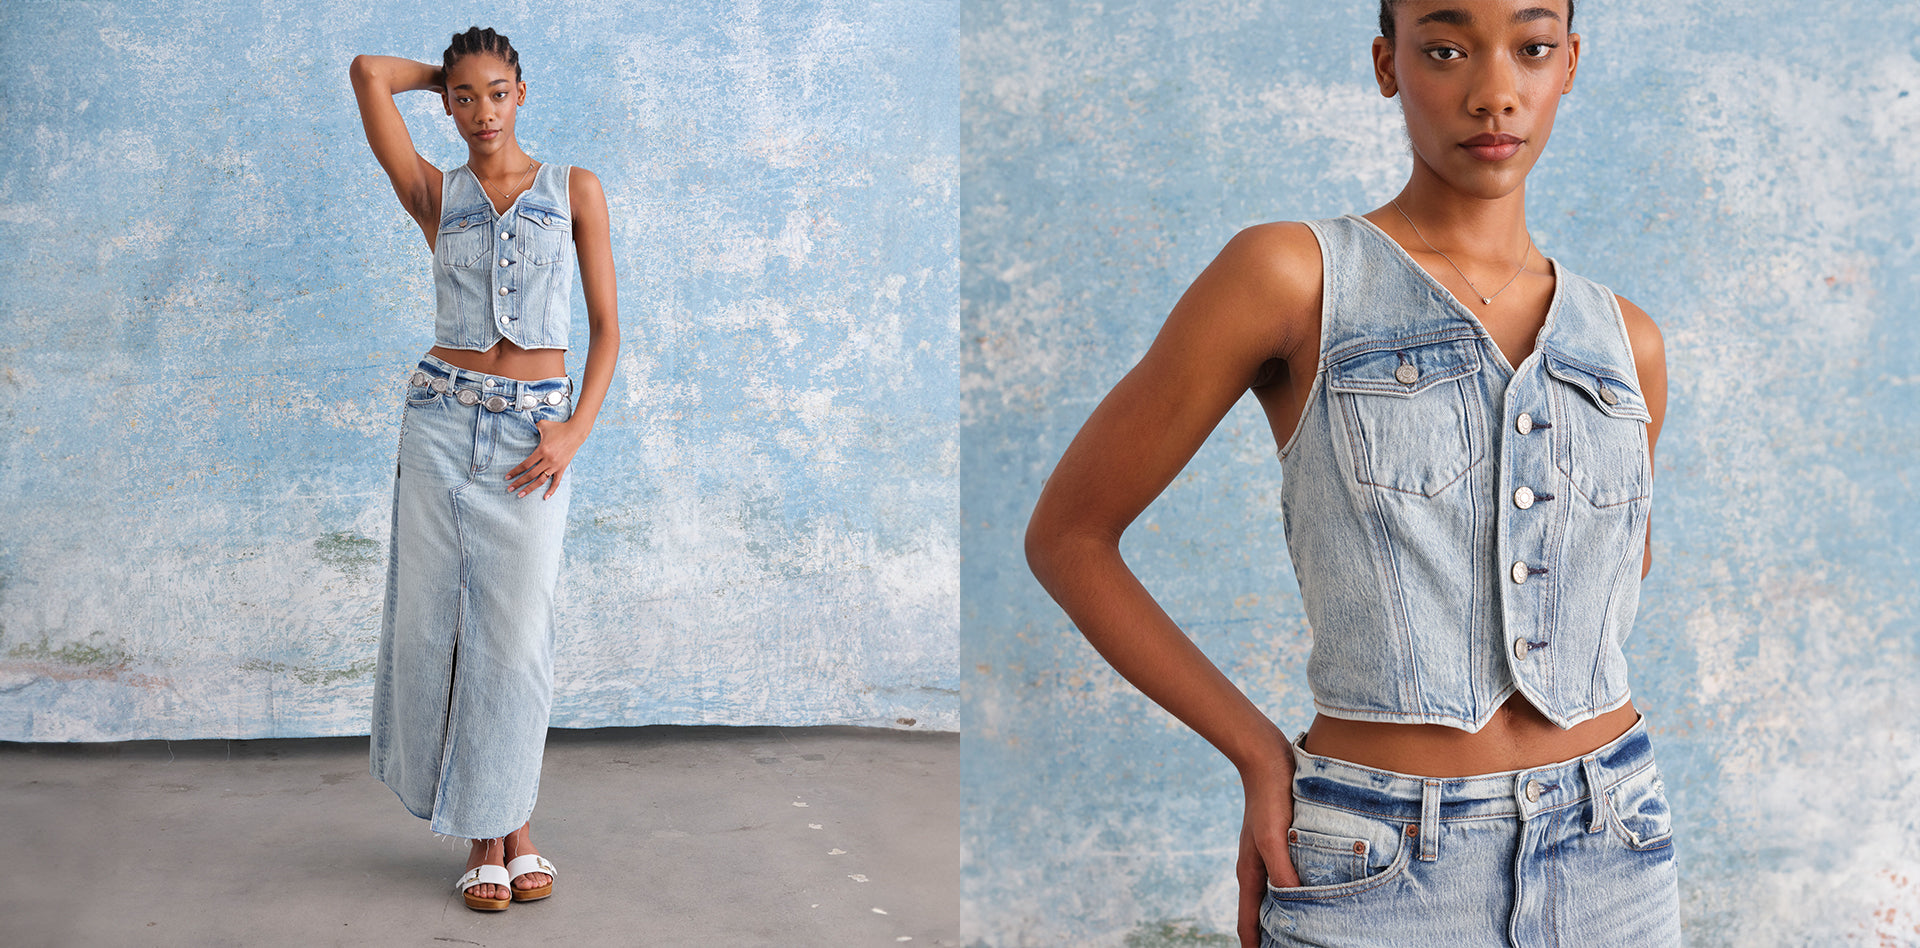 The Denim Trends You'll Be Seeing Everywhere in 2023